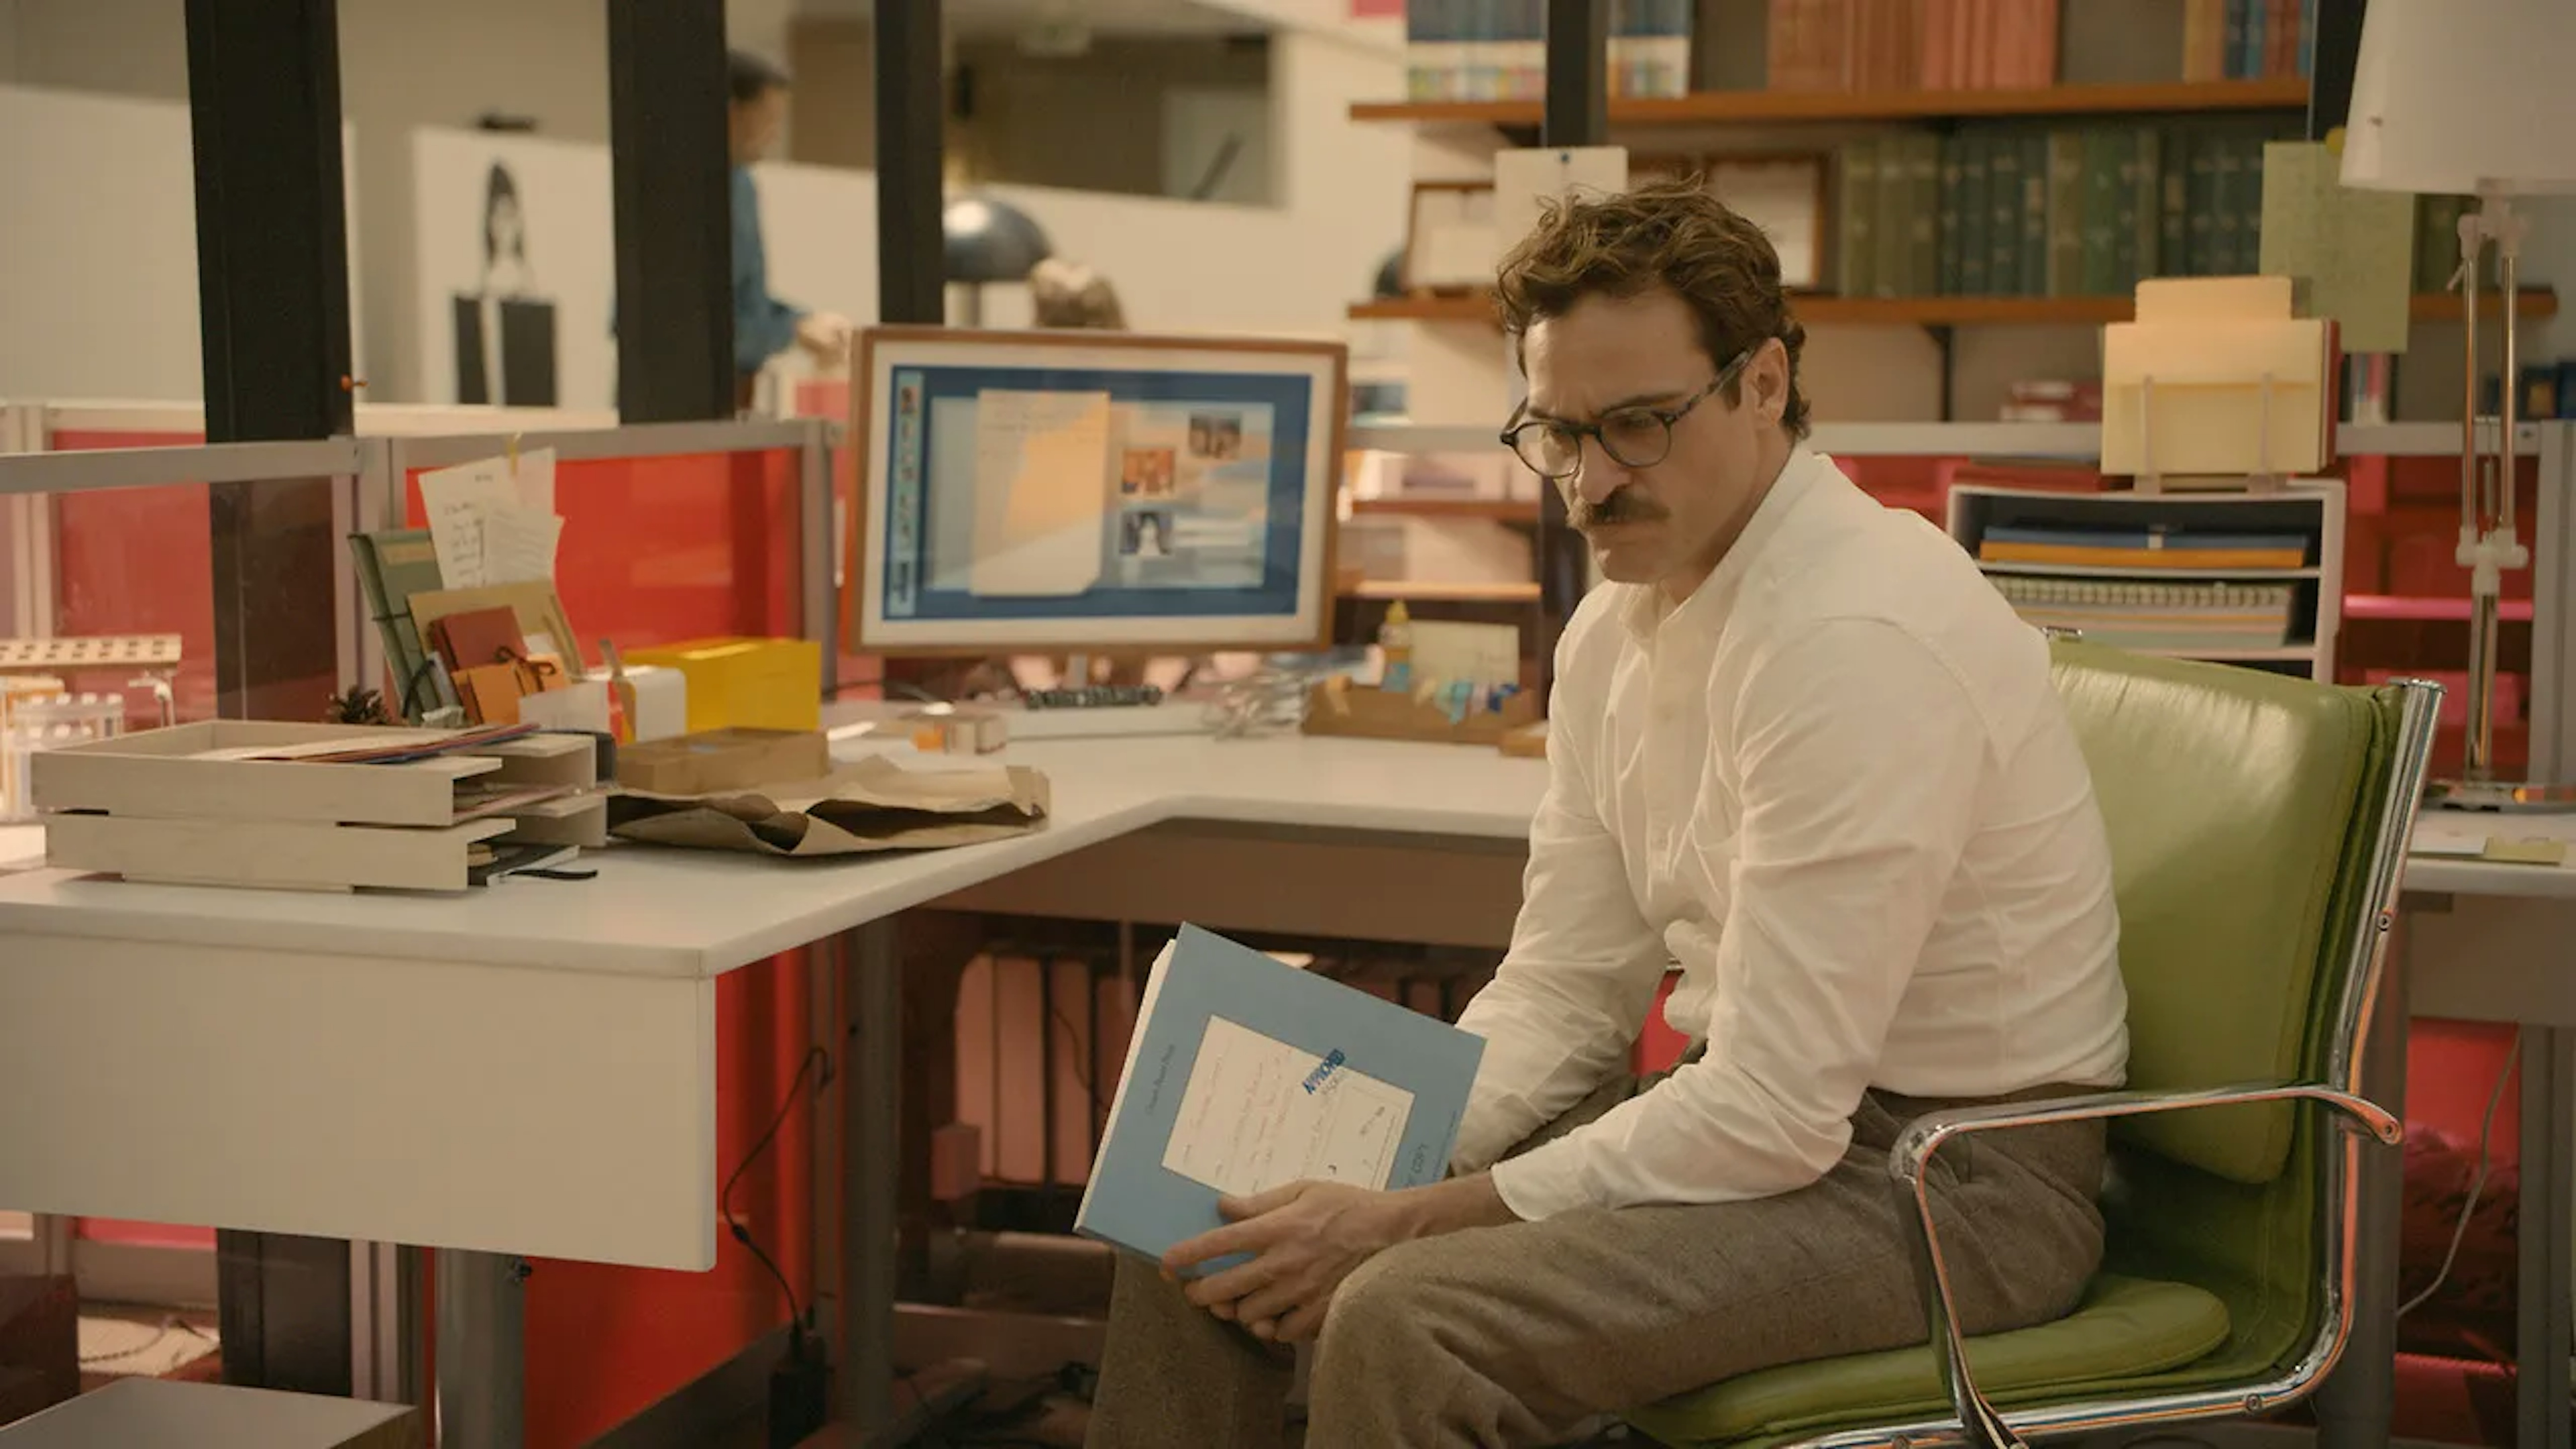 An shot from the movie Her, showing the protagonist interacting with his AI assistant